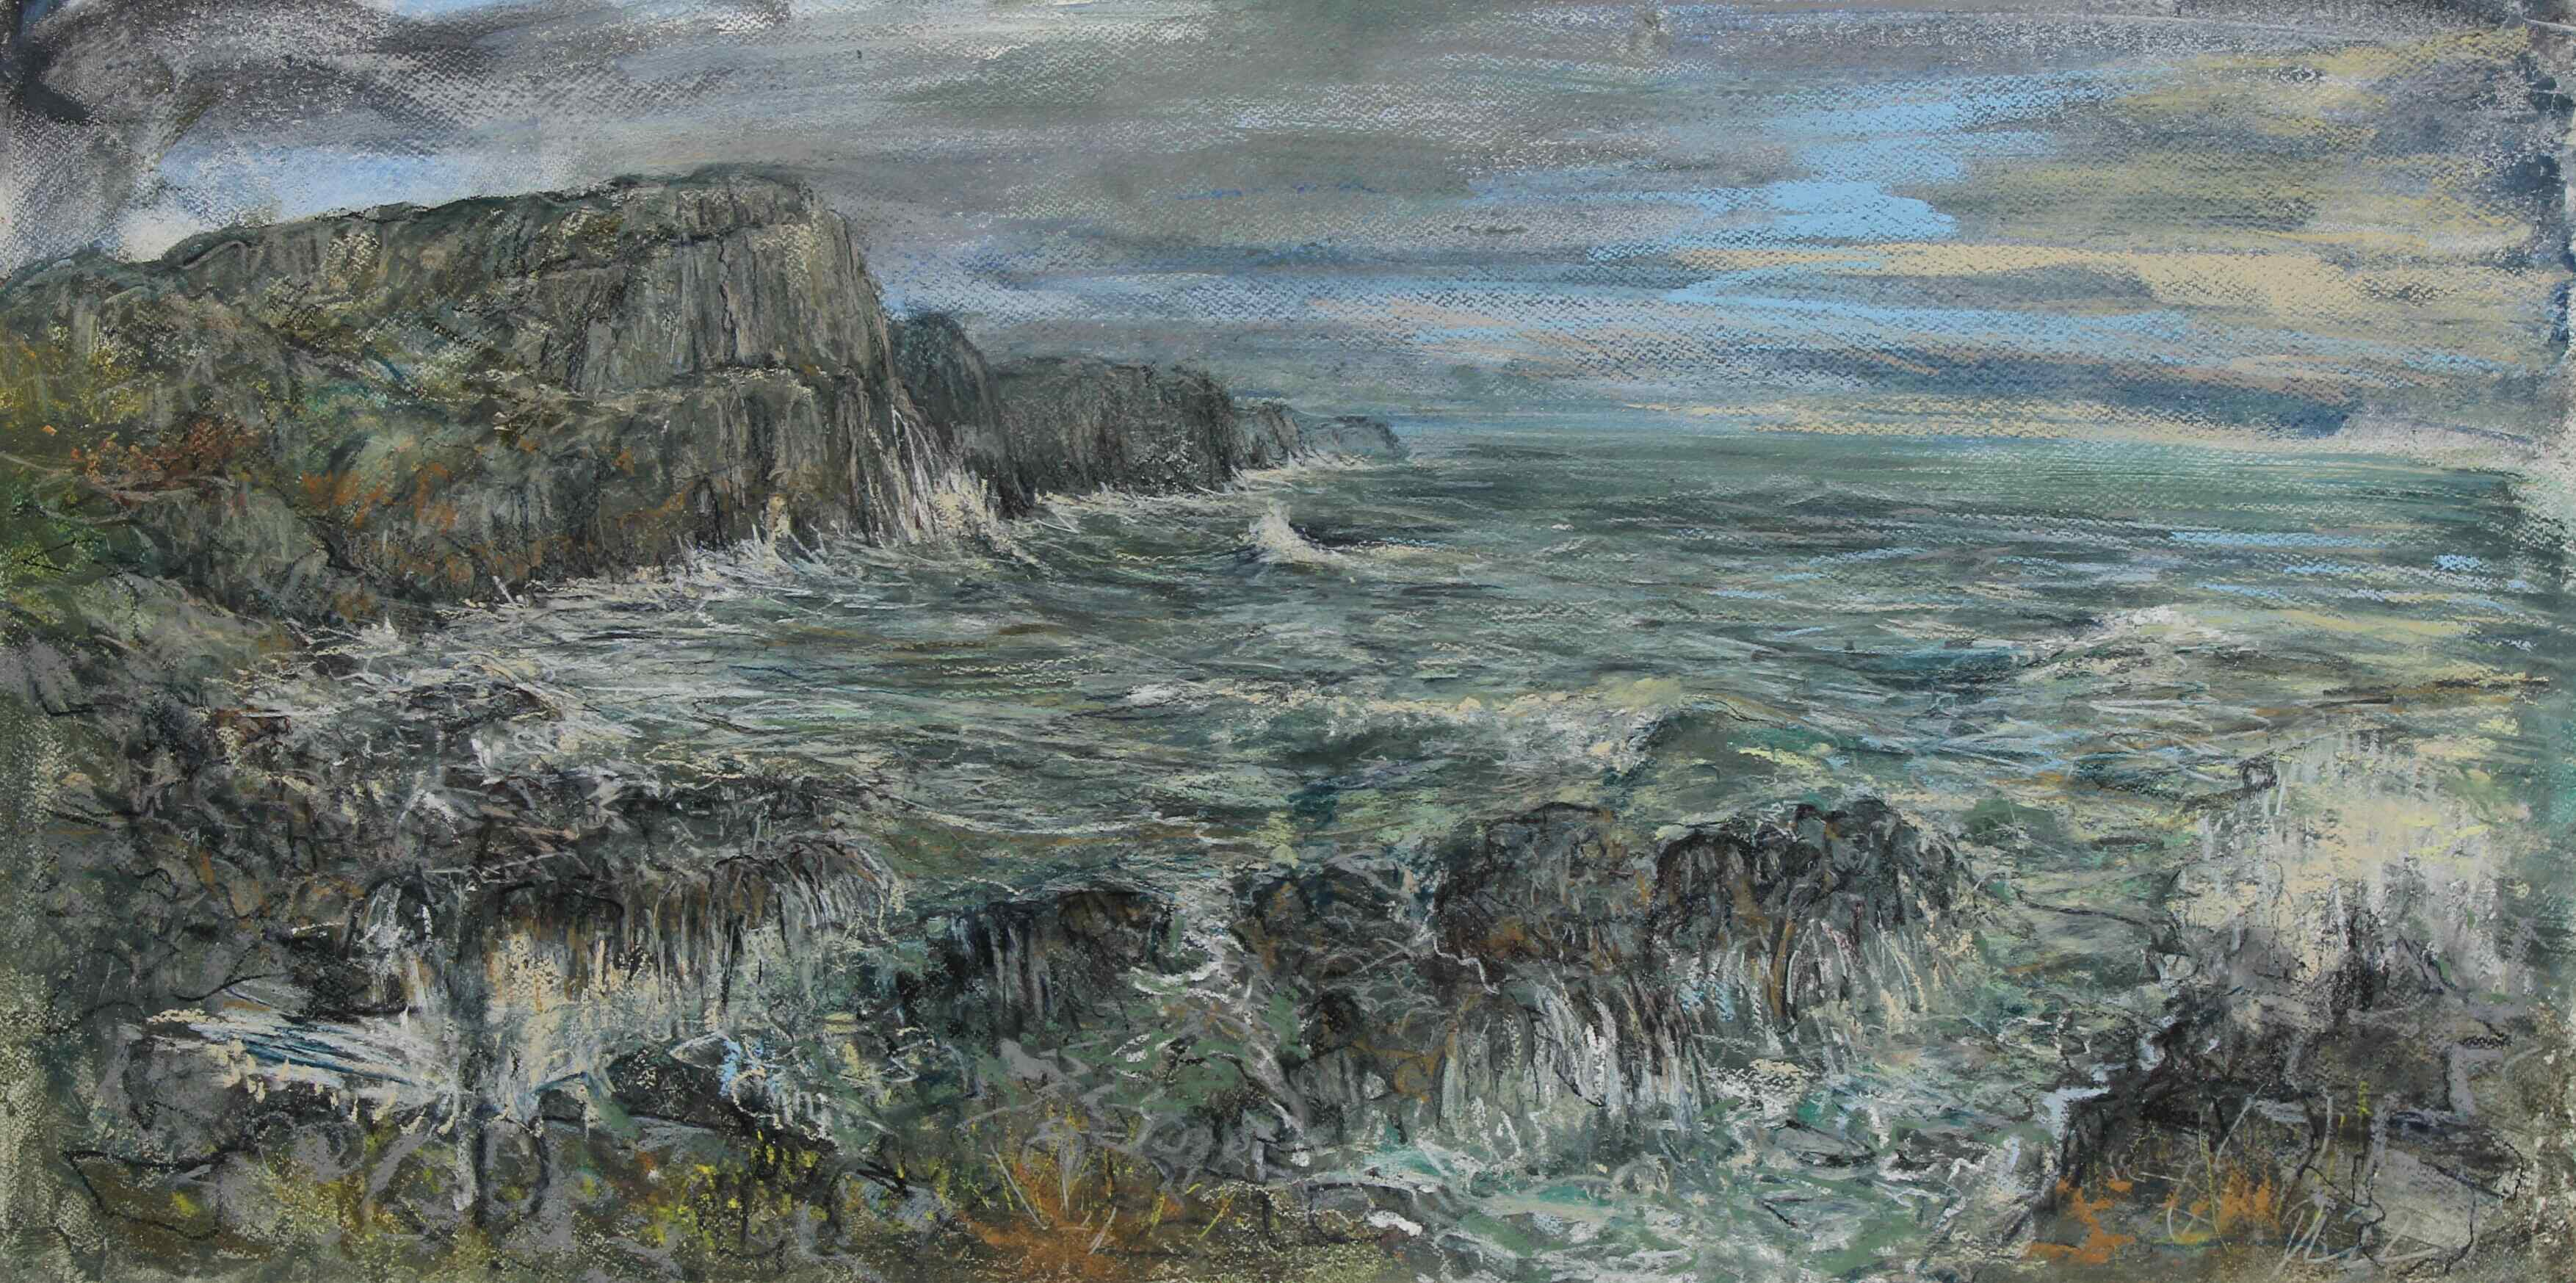 High Tide, Fall Bay. Mixed media on paper. 50x100cm.